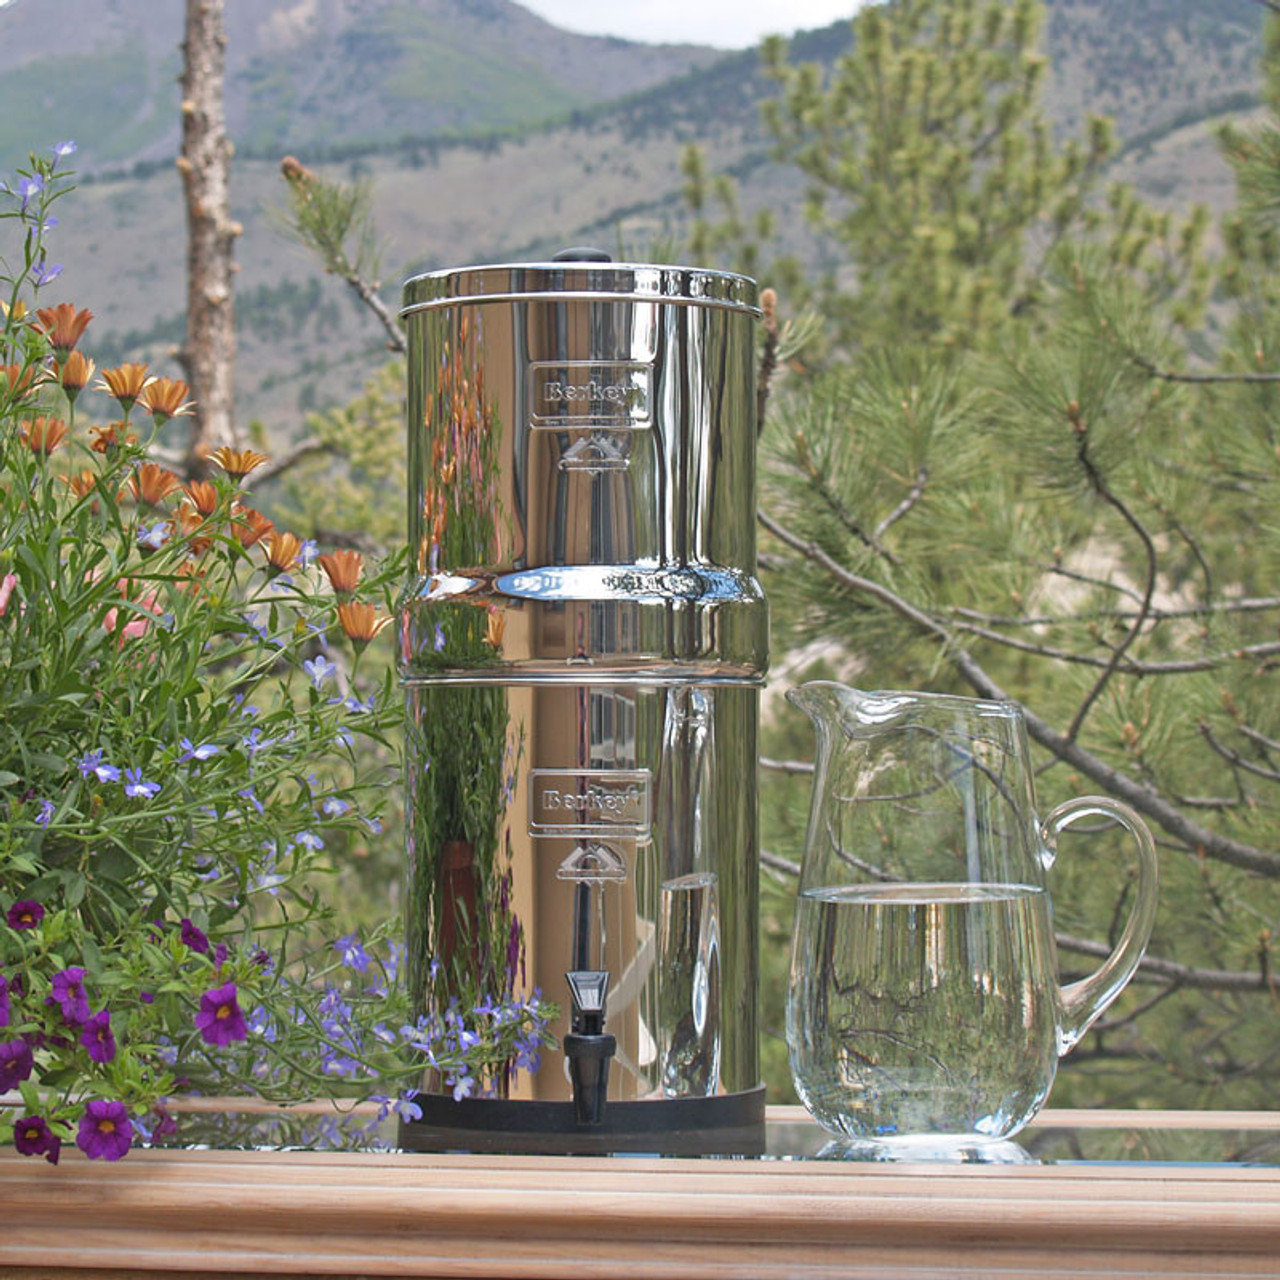 The Berkey Water Filter: A Story Of Clean Water 